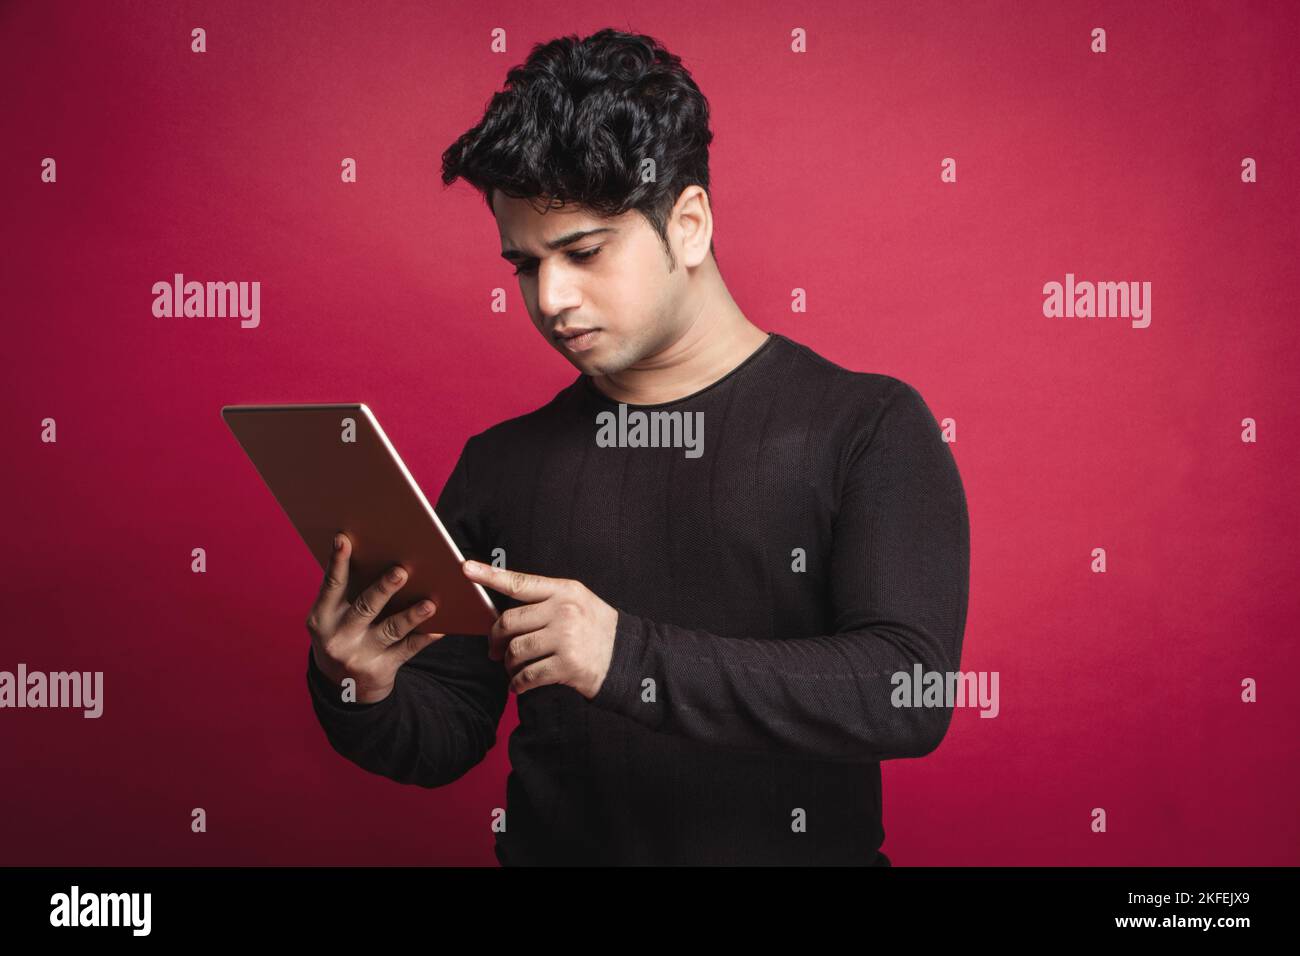 Serious young Indian man in a black t shirt using a digital tablet against a red background Stock Photo